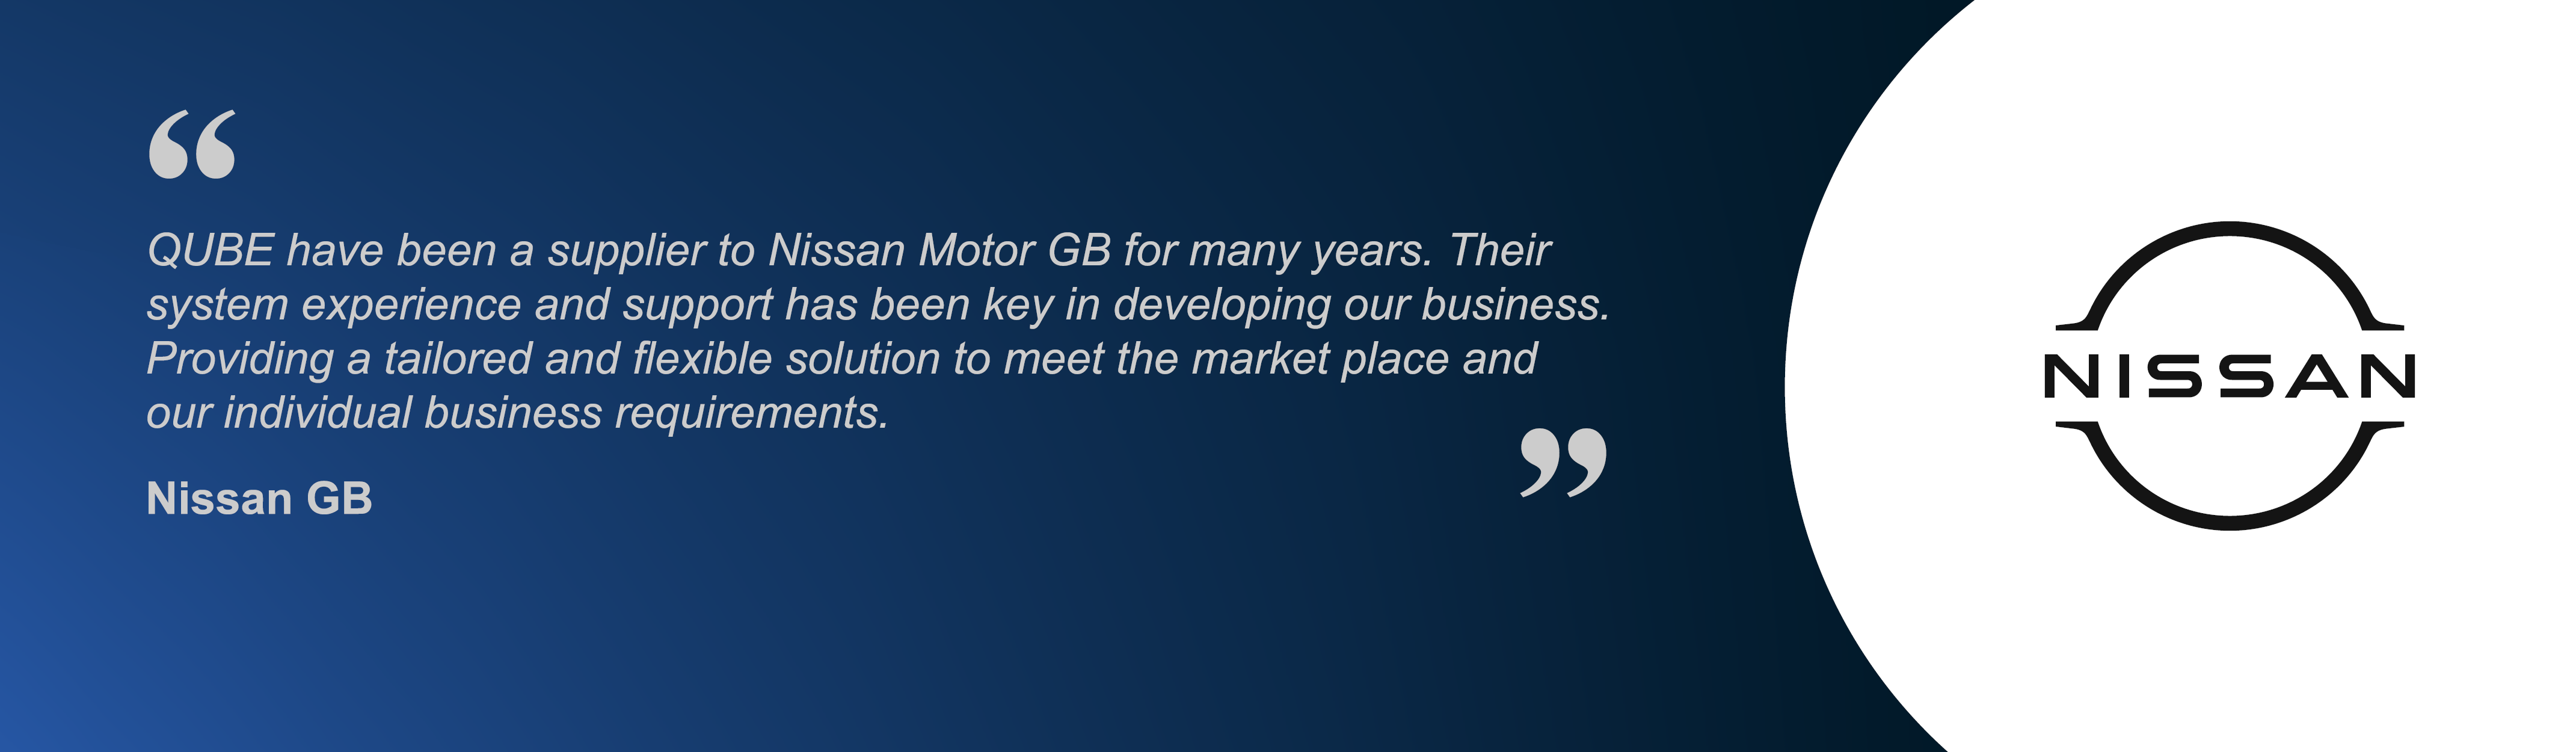 Feature image of client quote from Nissan GB (Great Britain)